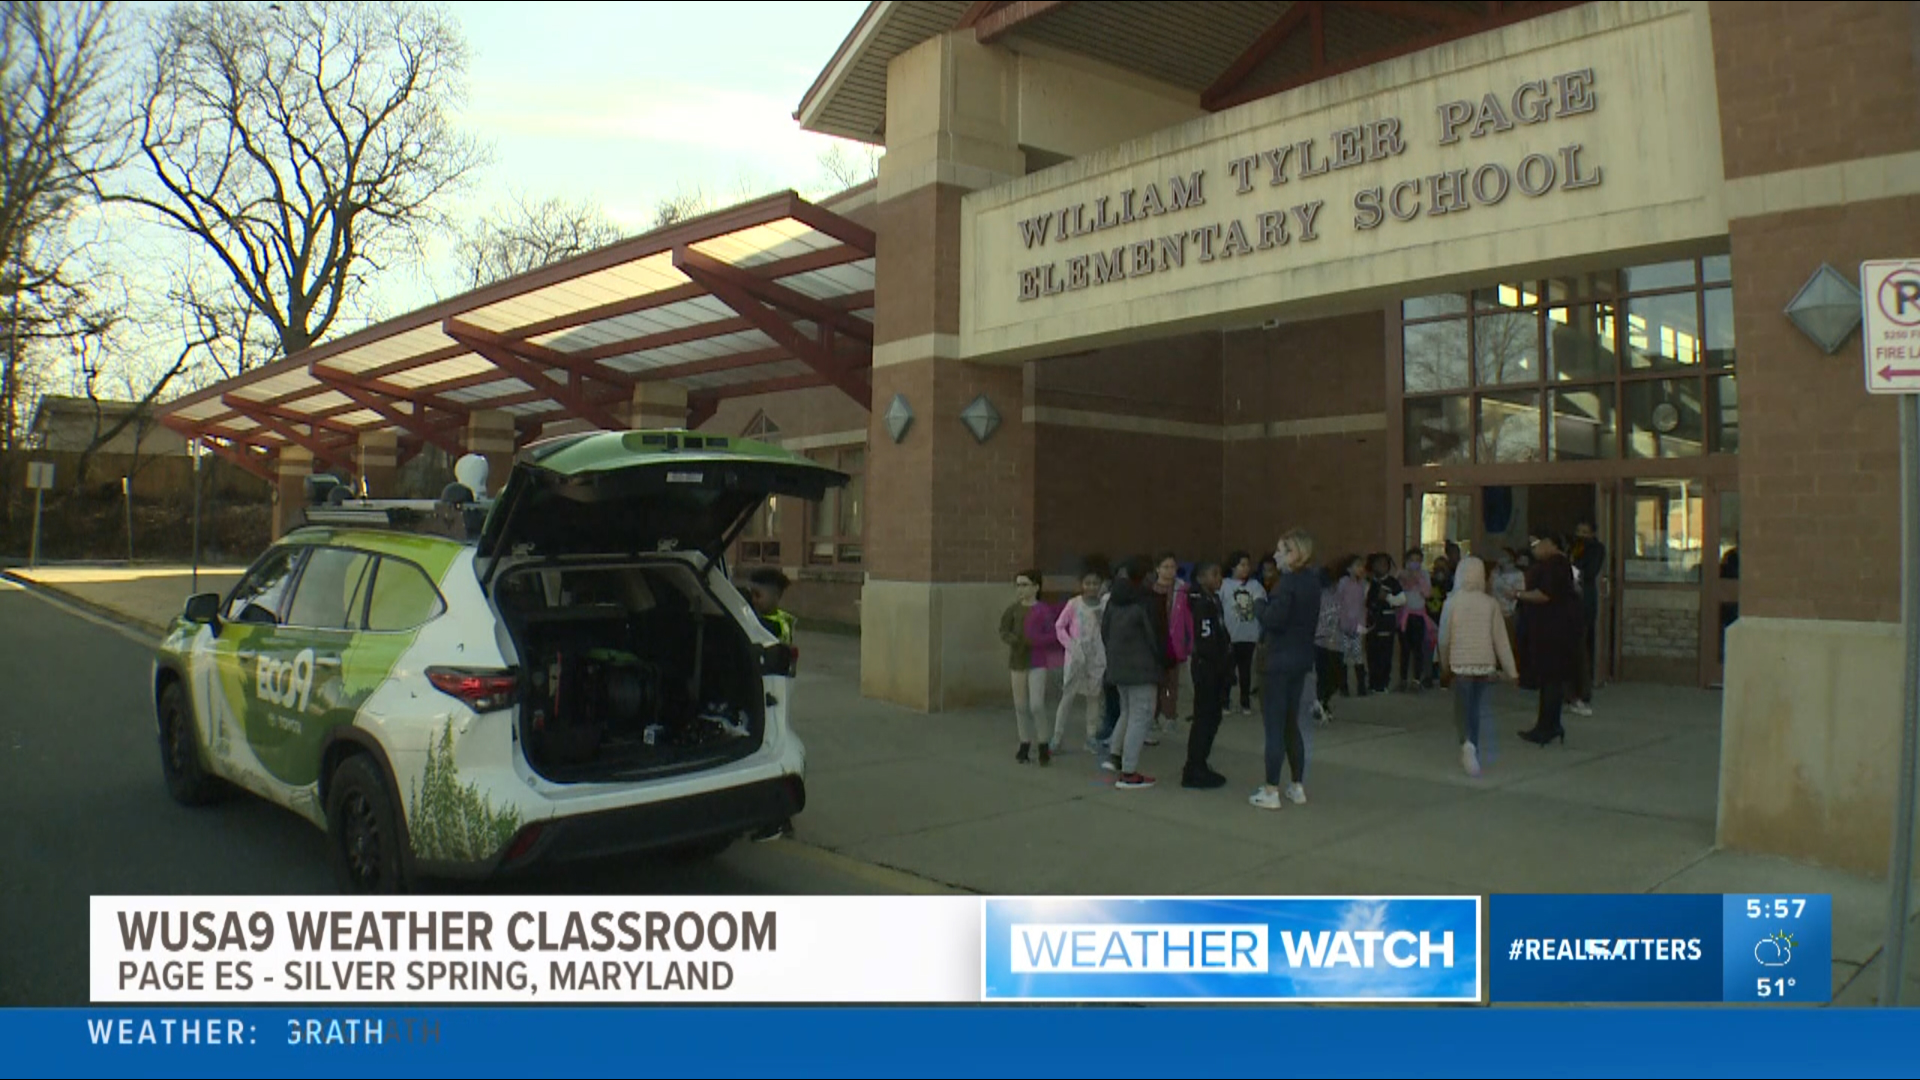 Today, our Weather Classroom -- along with ECO9 -- paid a visit to William Tyler Page Elementary in Silver Spring.